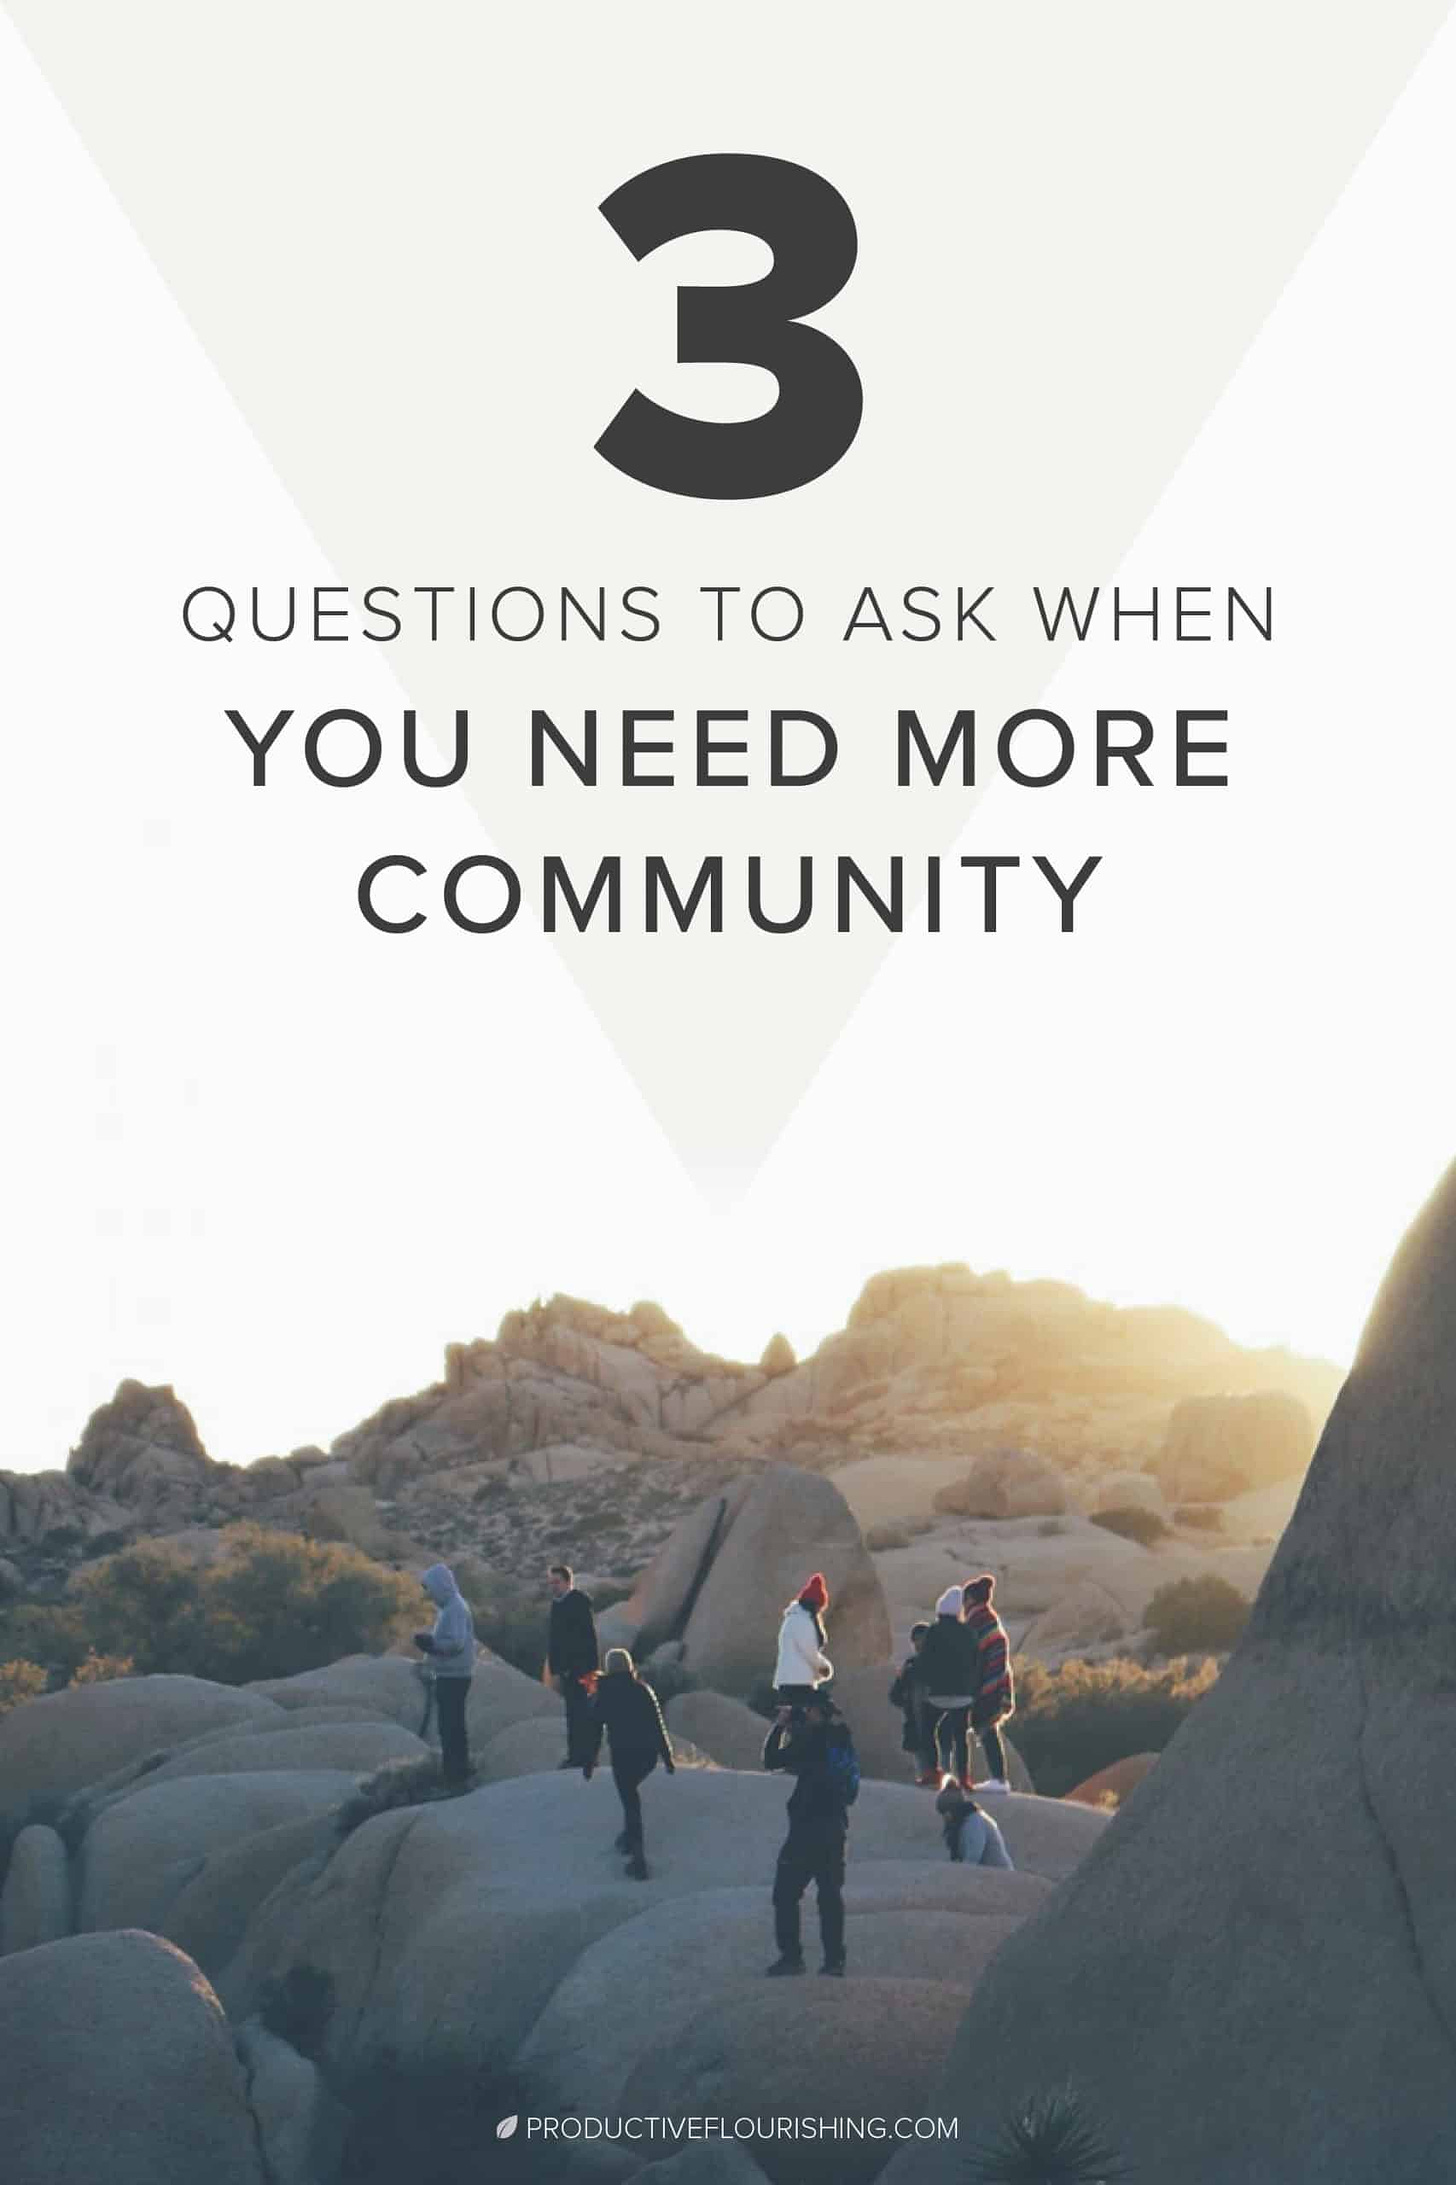 3 Questions to Ask When You Need More Community. Click here to learn how to create more connective time. Become more creative and productive when you connect with a community regularly. Your business will thank you for it. #connectivitytime #creativeproductivity #productiveflourishing